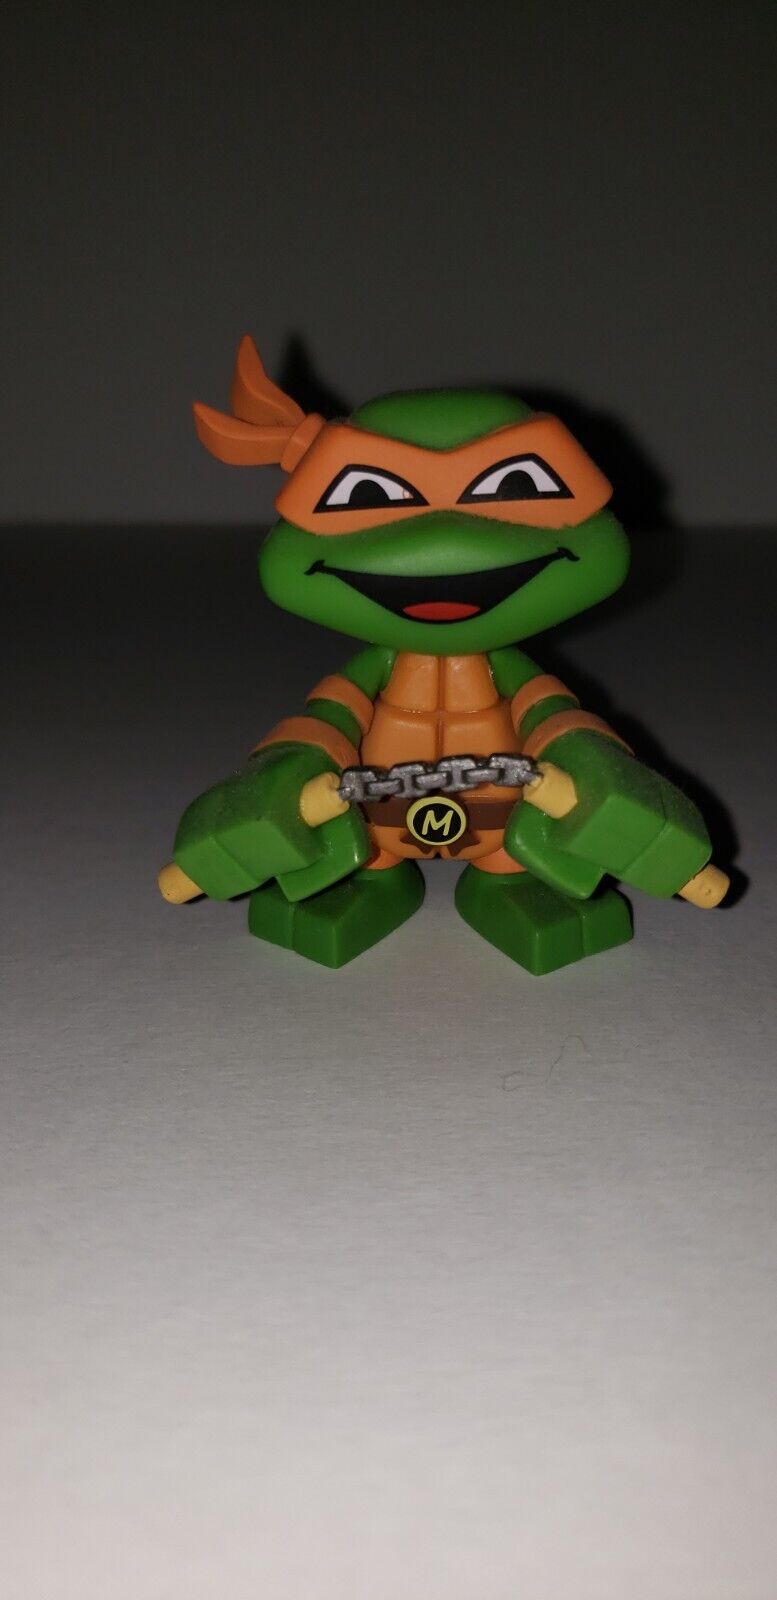 This Mini Michelangelo from Funko see details 